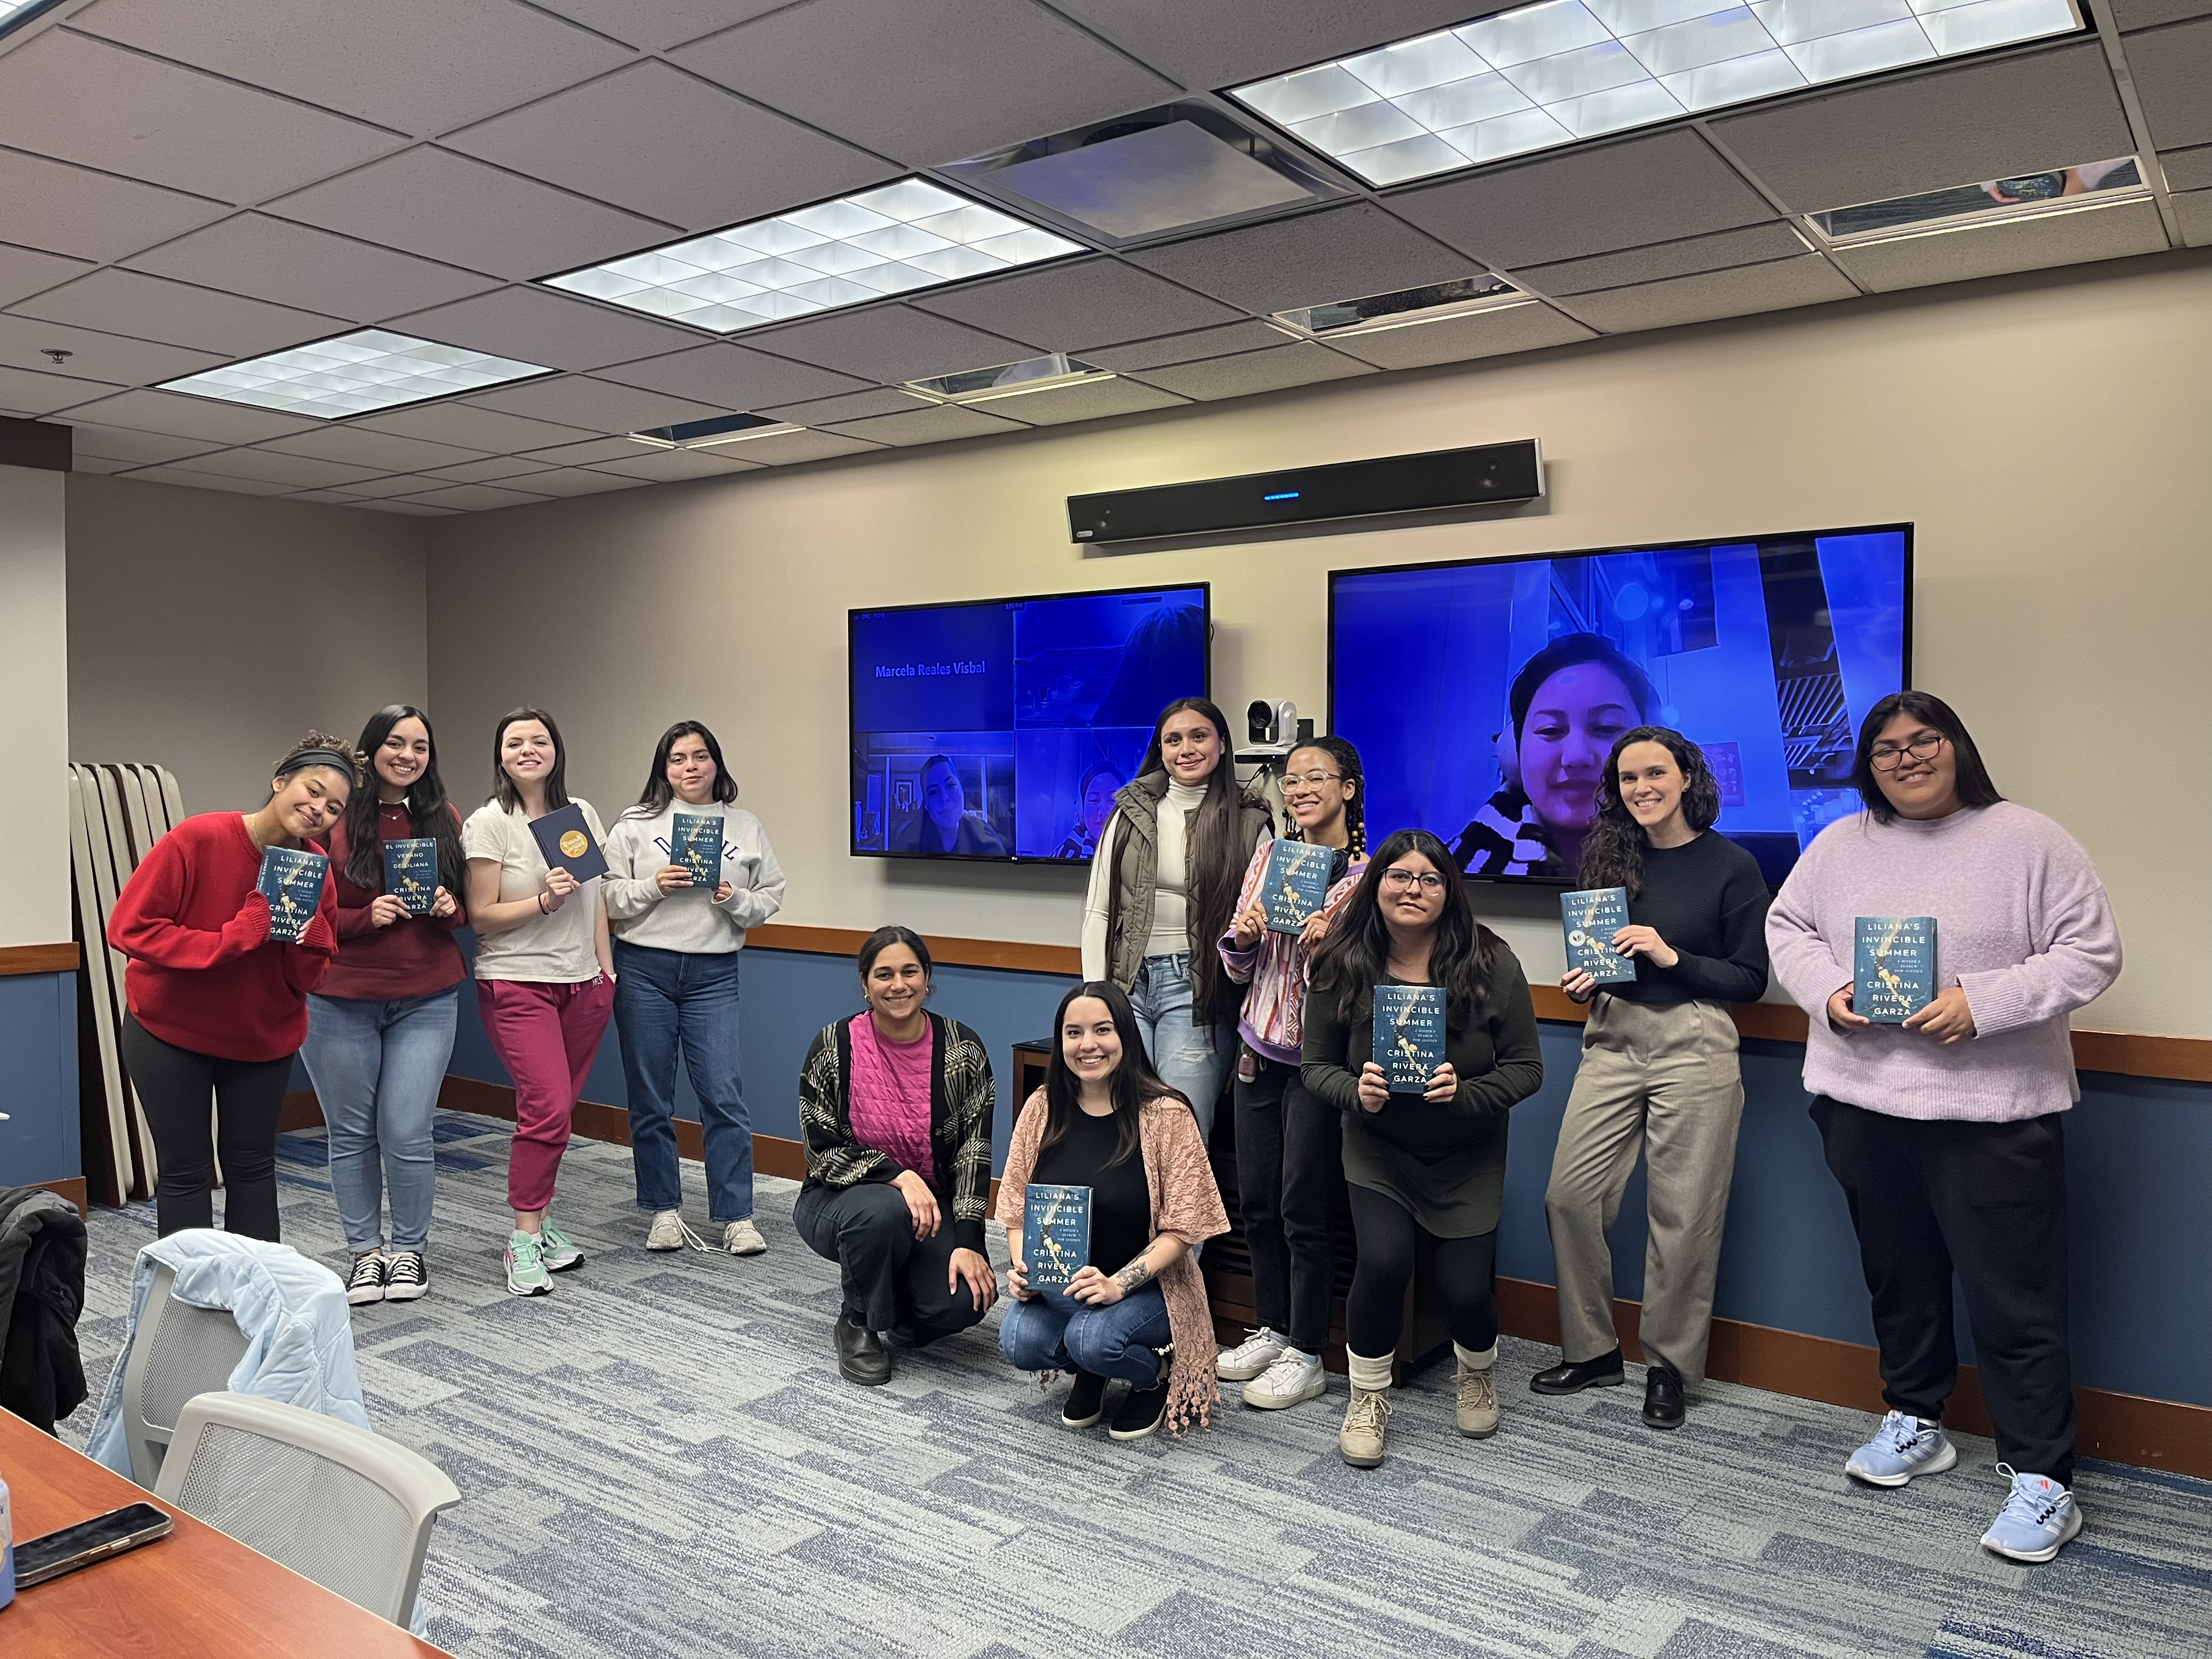 Latinx Book Club members holding their book and taking a picture including members joining via zoom in a meeting room at the DePaul Center